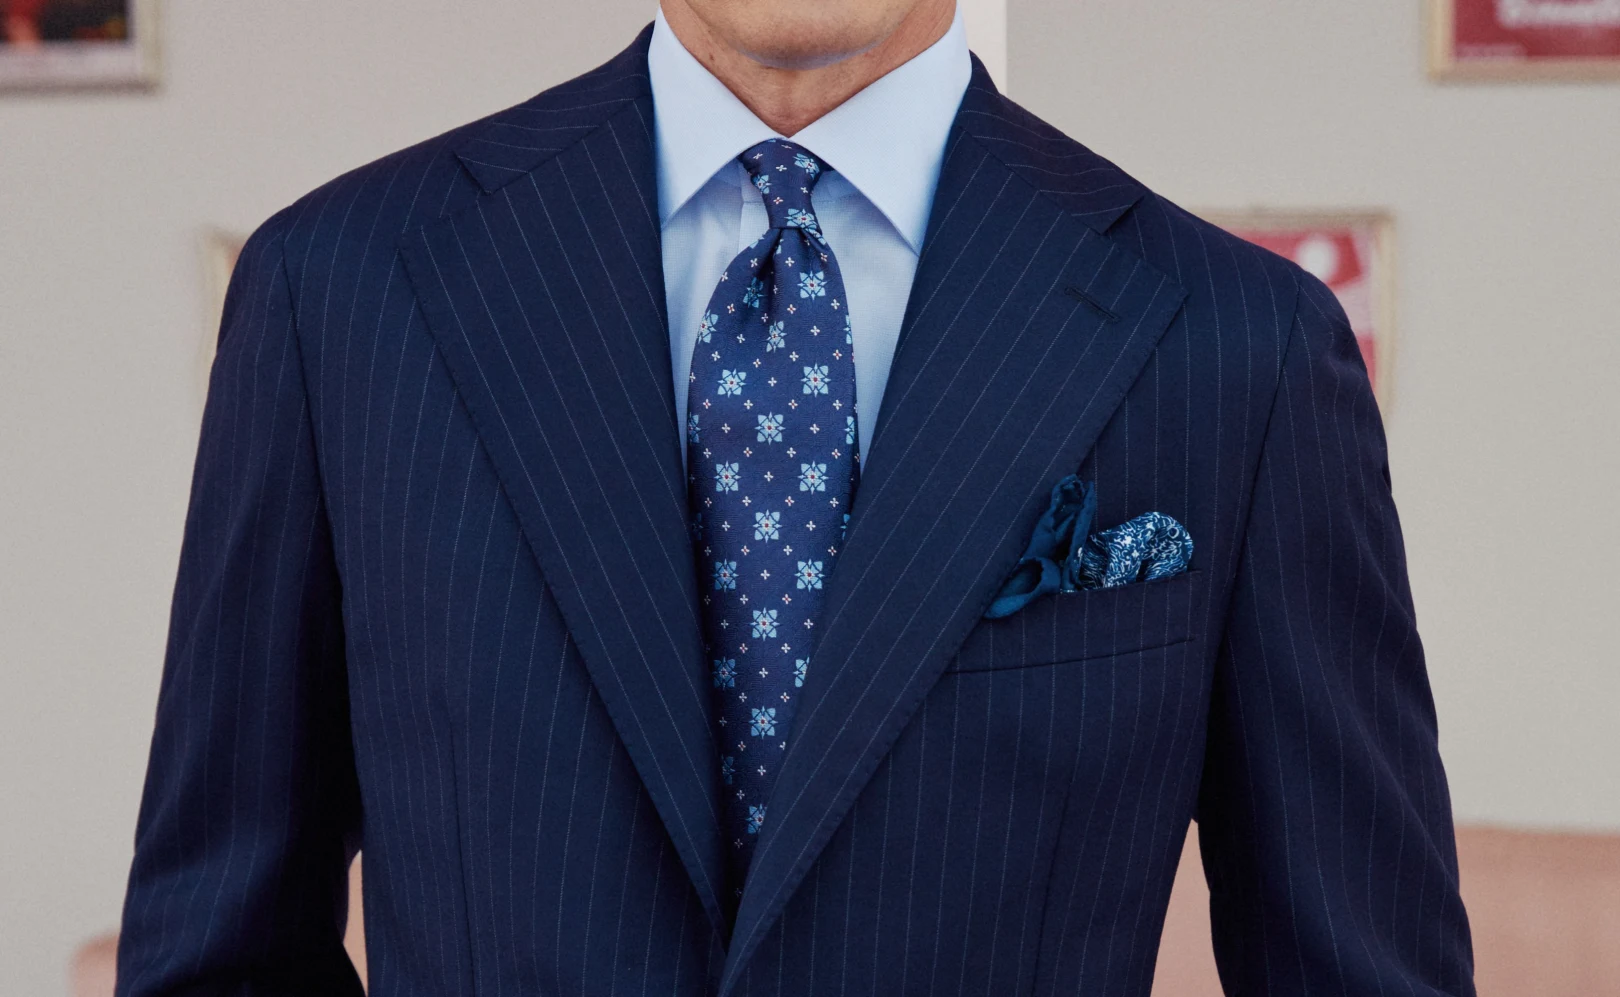 blue pocket square in suit matching tie